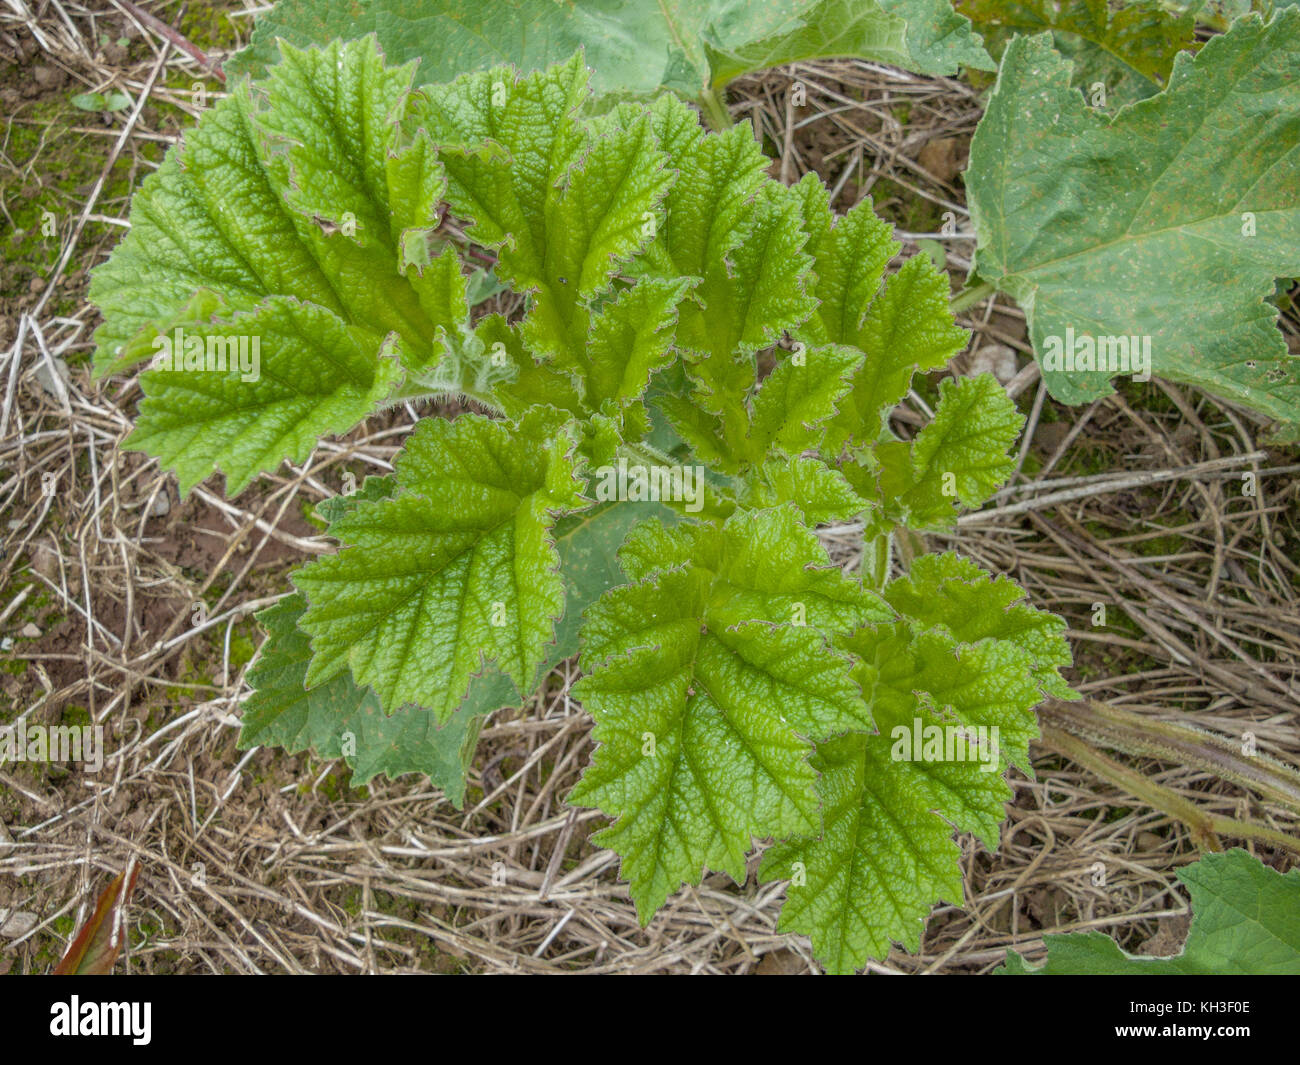 Young leaflet of Hogweed / Cow Parsnip / Heracleum sphondylium. This is the plant which cases skin burns when the sap gets on skin in sunshine. Stock Photo